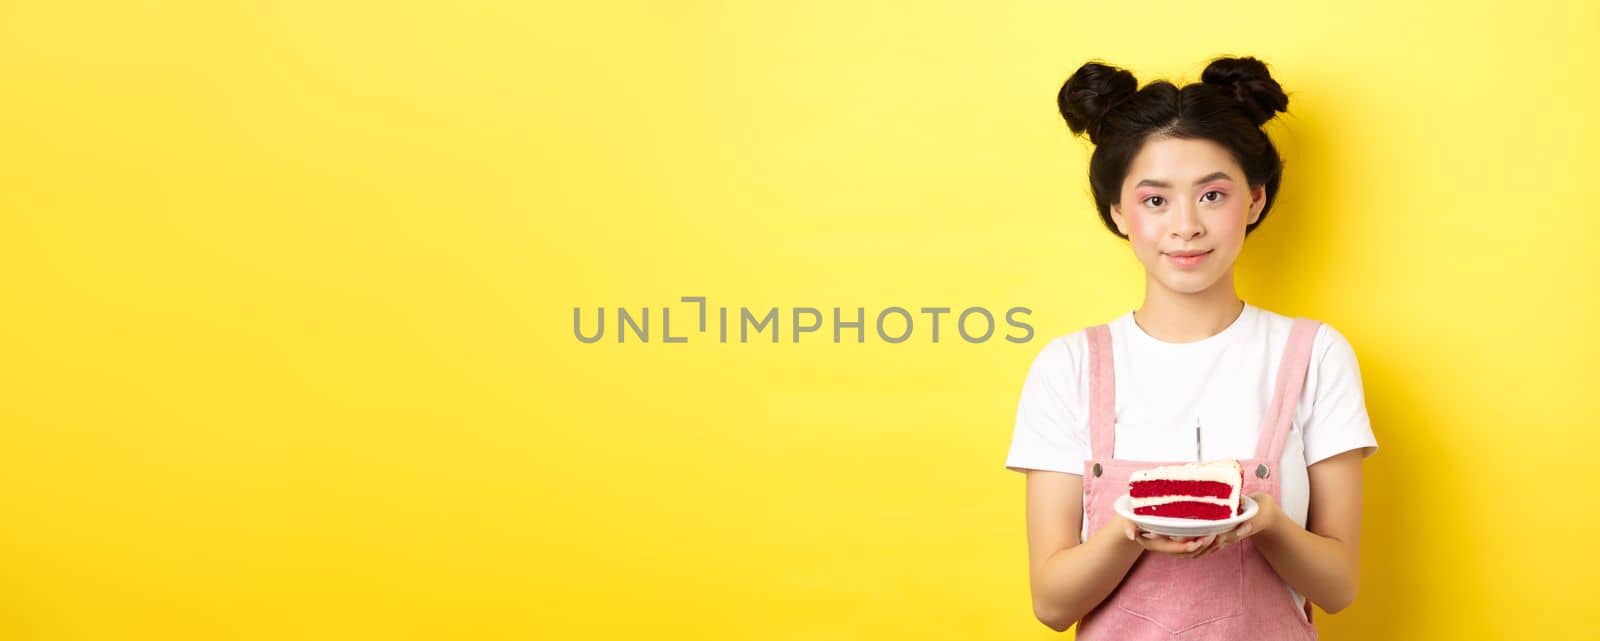 Asian birthday girl standing with cake and smiling, celebrating b-day on yellow background.